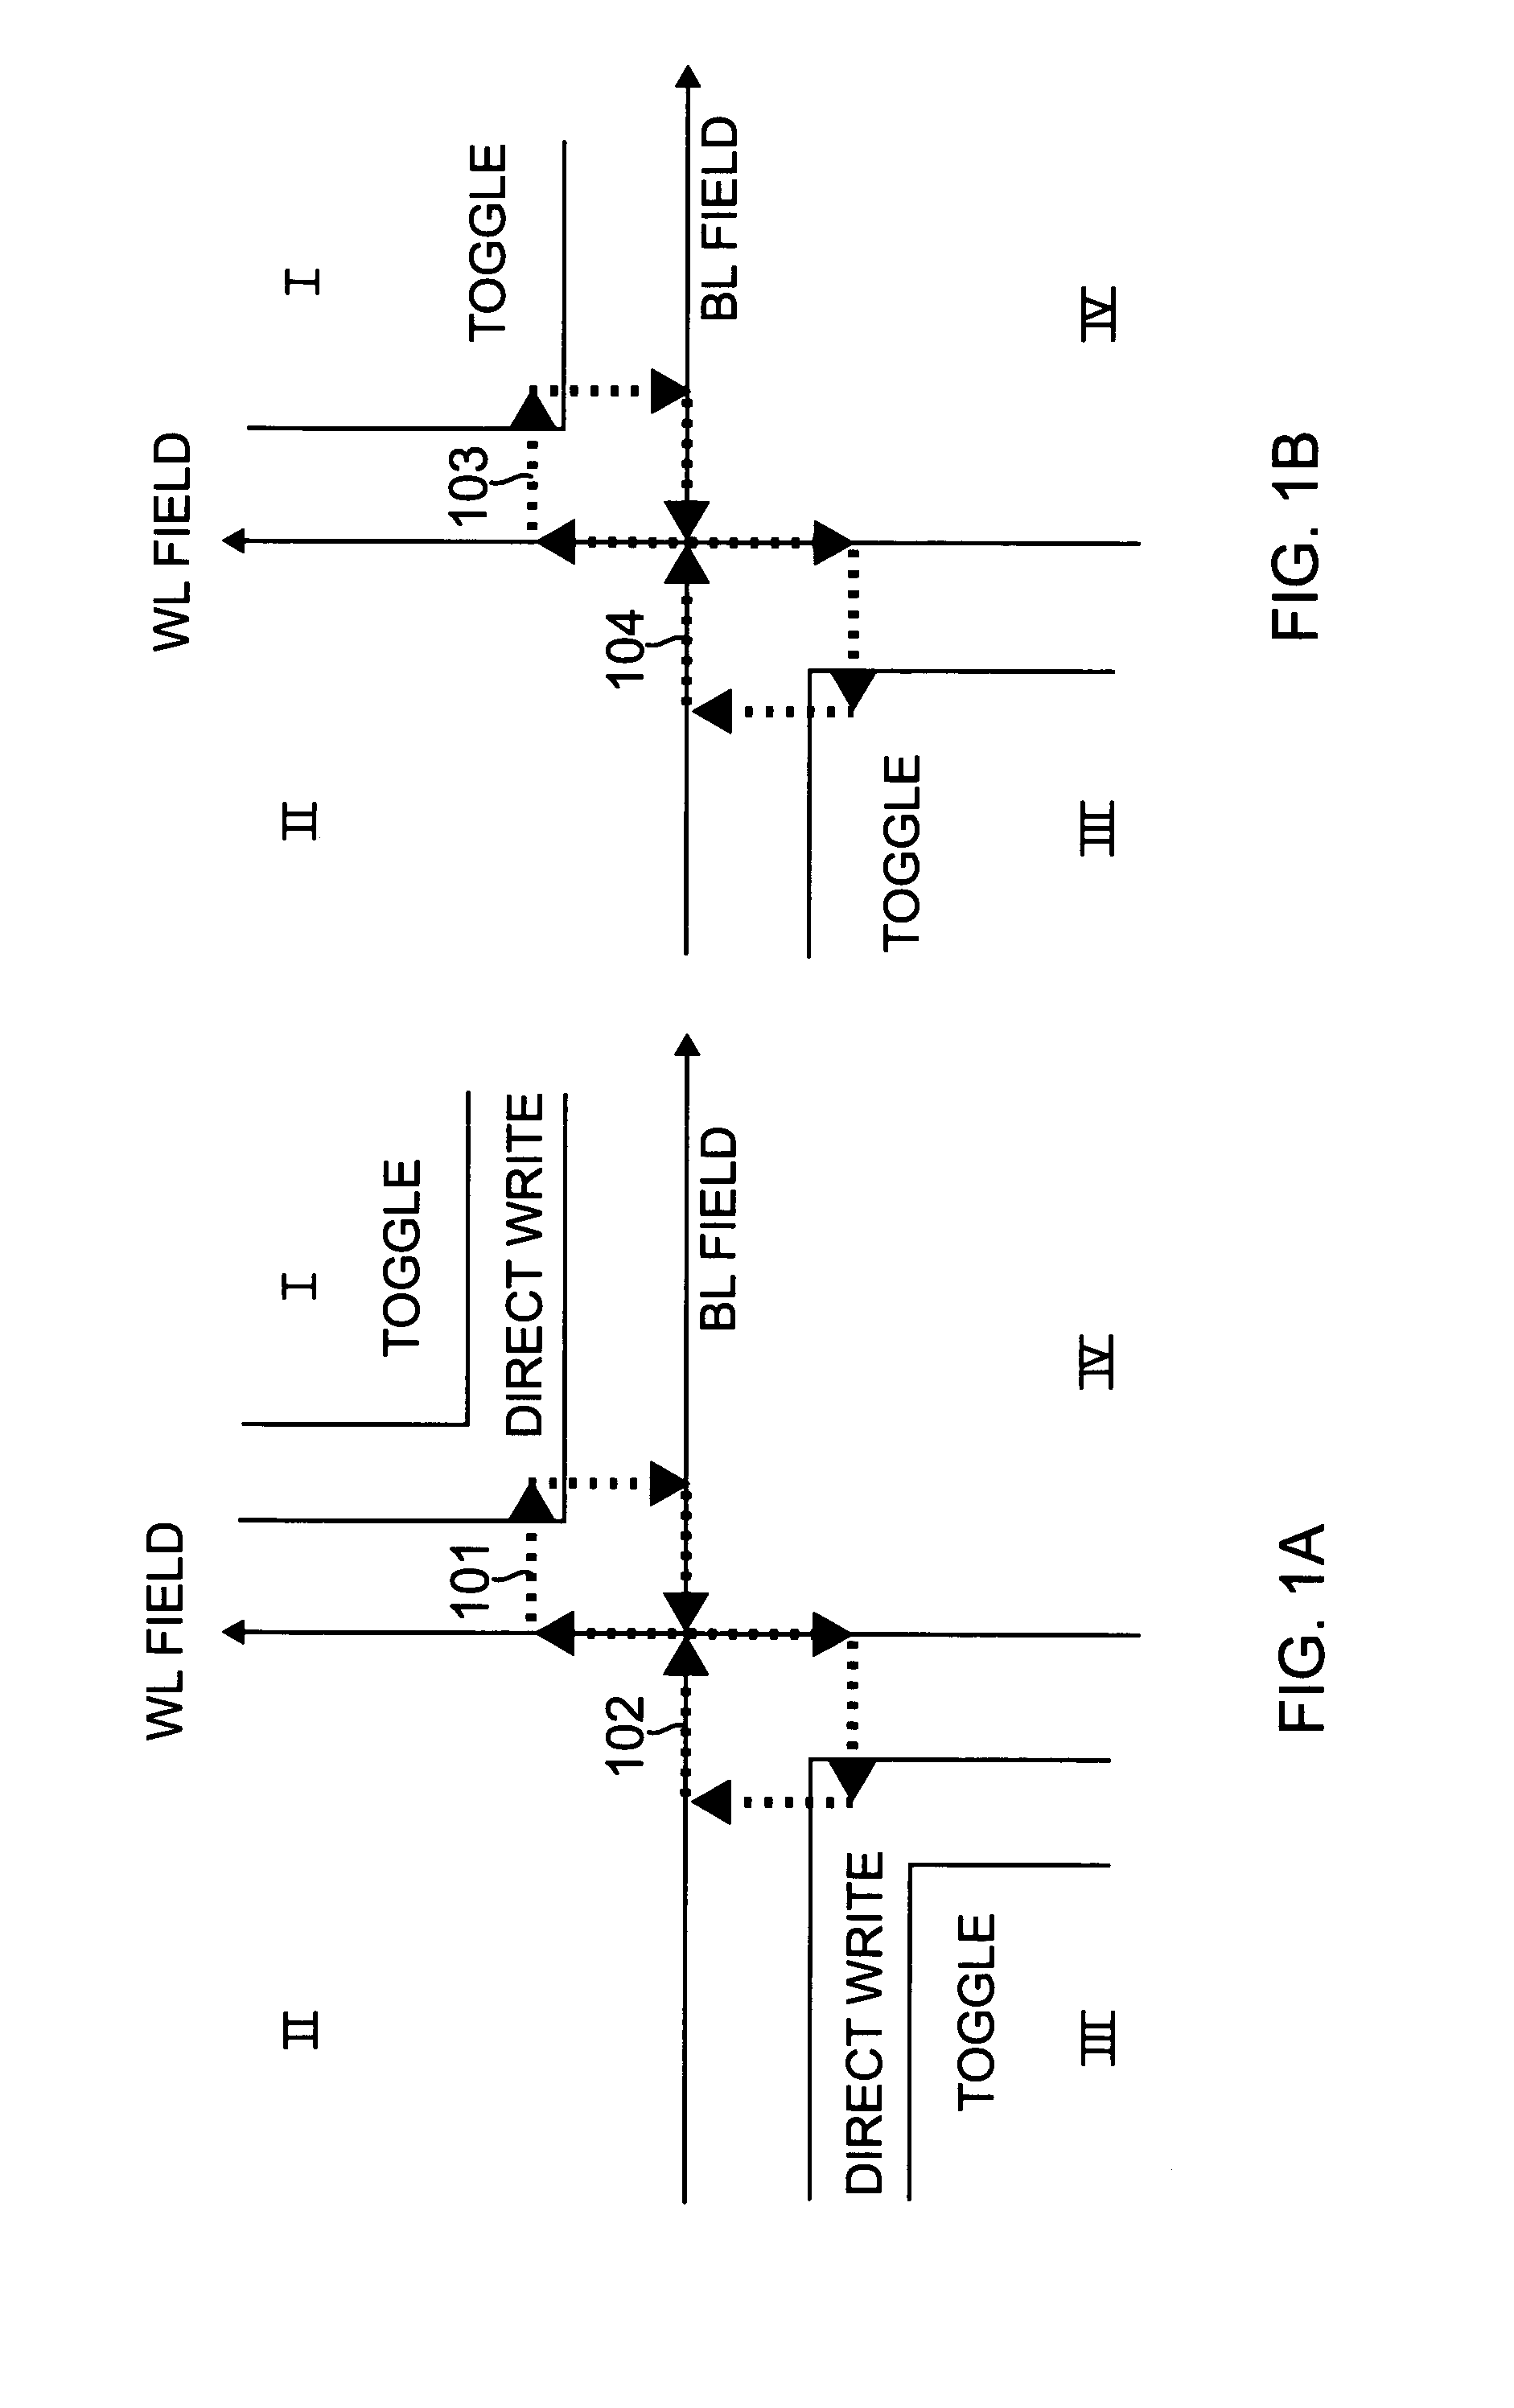 Multiple-bit magnetic random access memory cell employing adiabatic switching